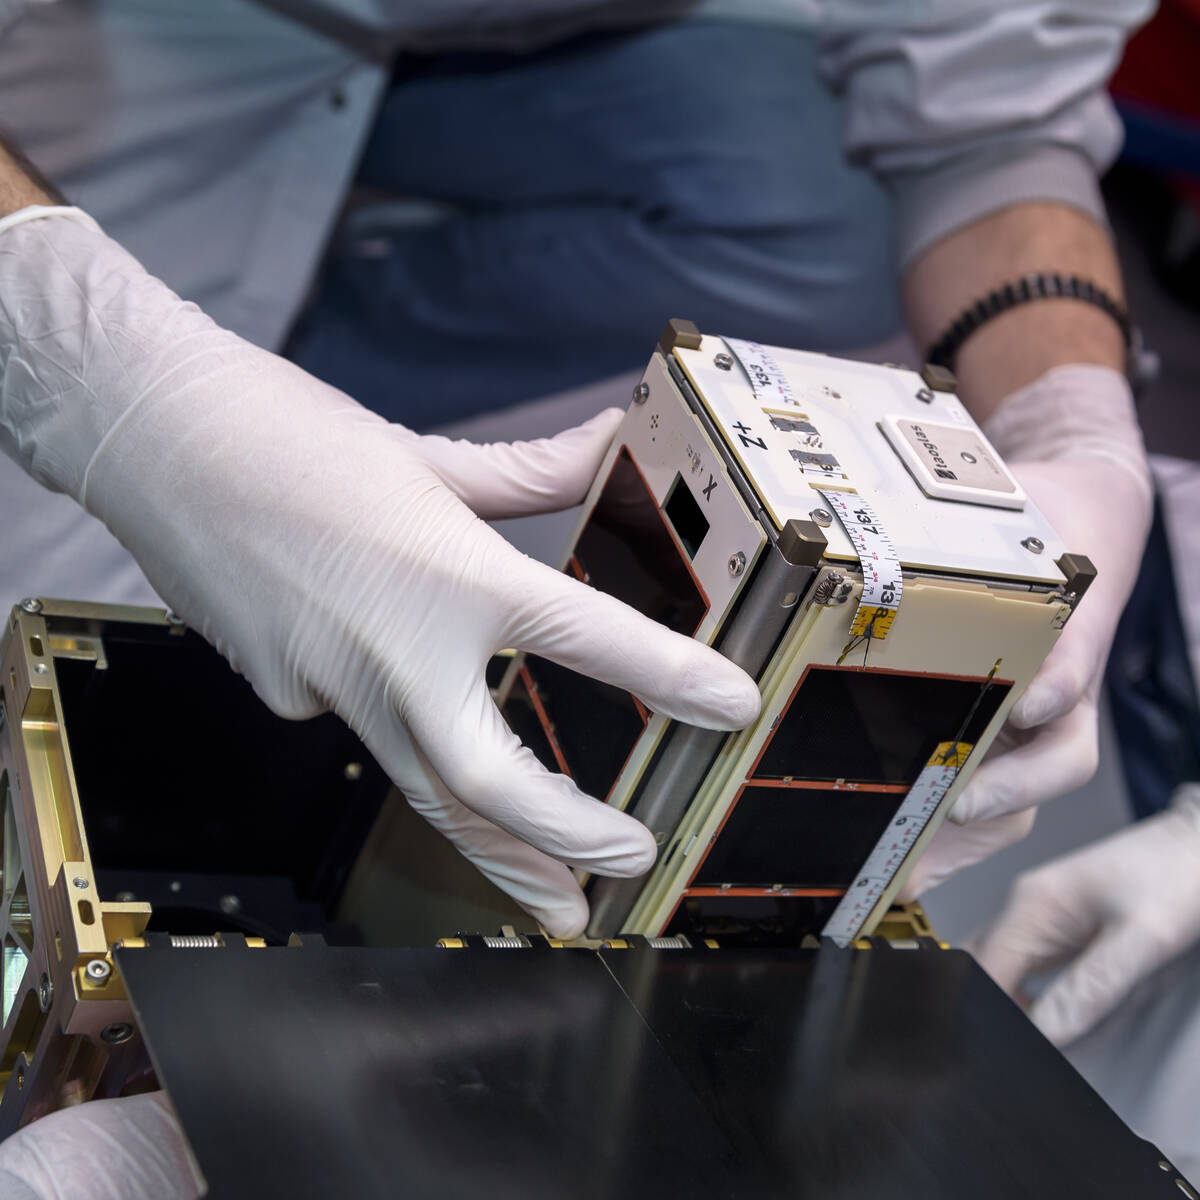 prepares one of the four PyCubed-Based CubeSat (PY4) spacecraft for installation into the Small Satellites Dispenser in the Small Spacecraft Technology (SST) lab.